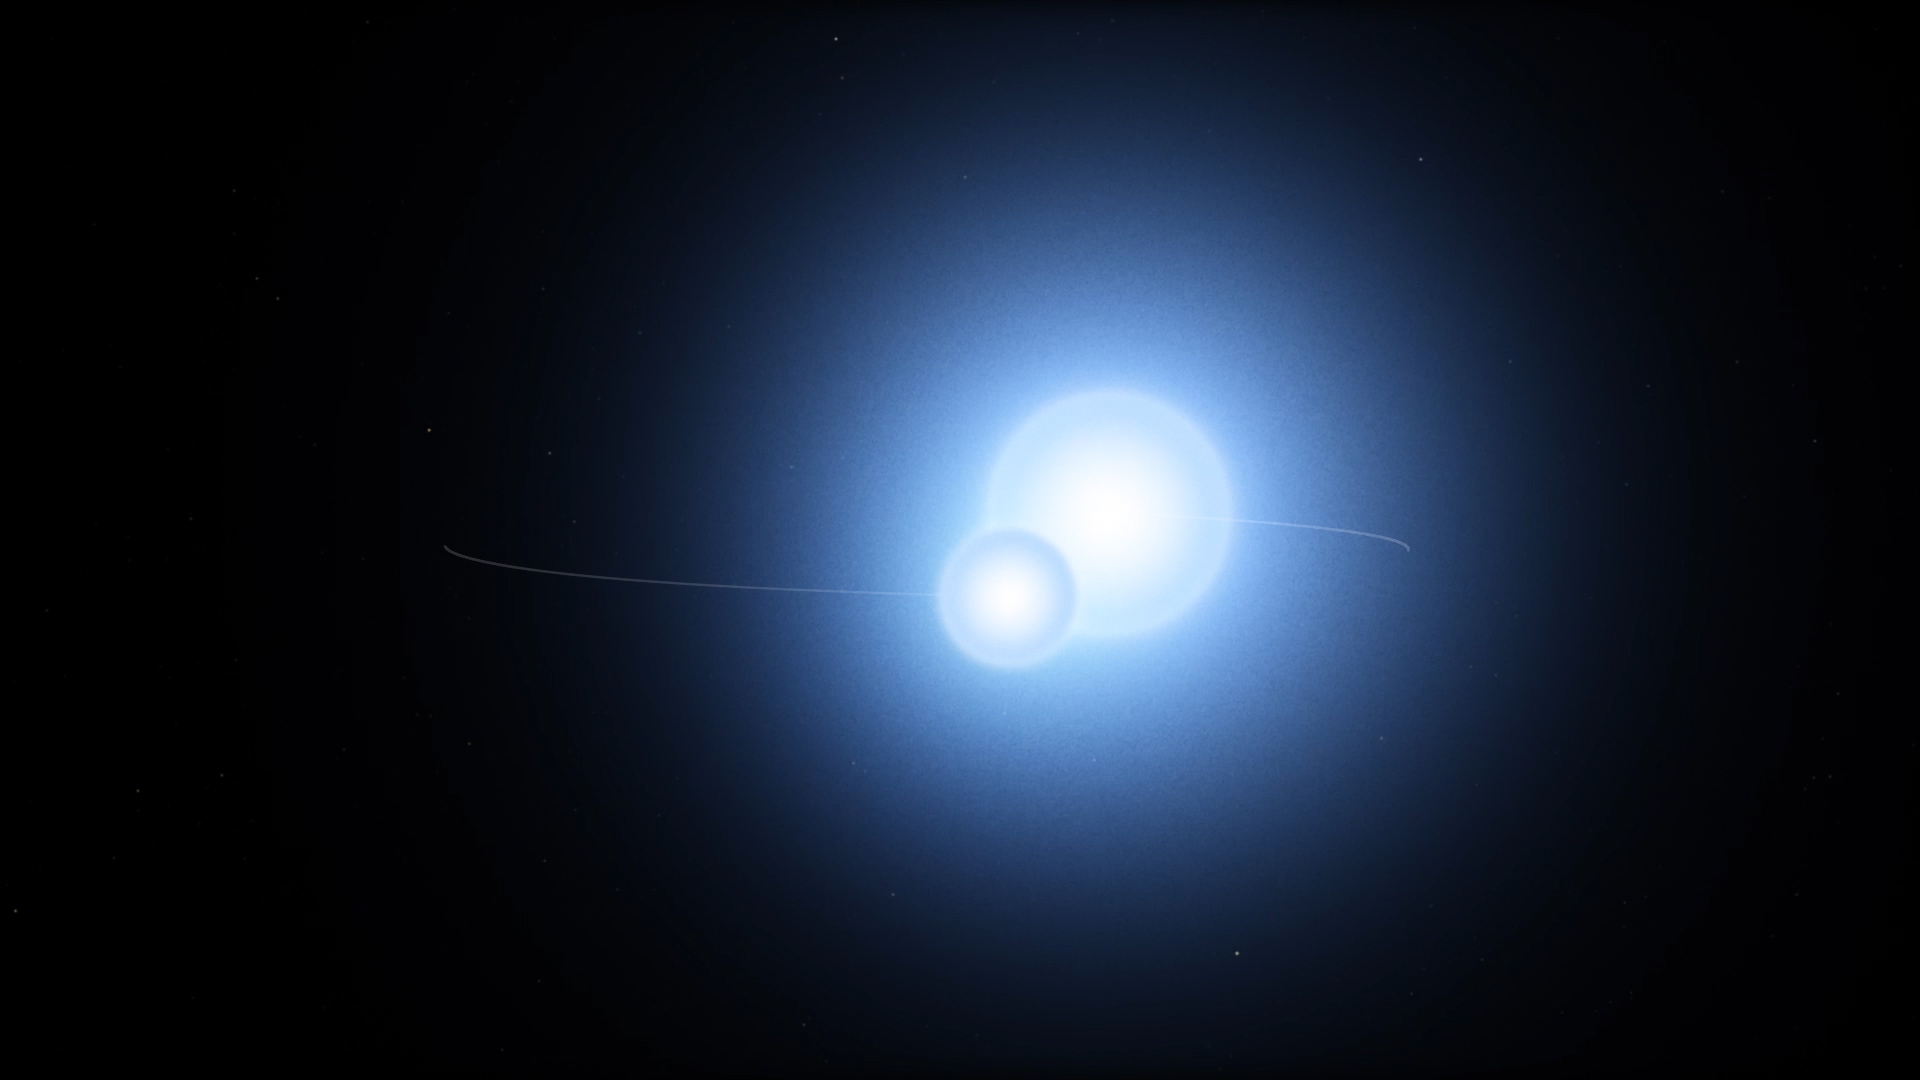 This animation illustrates a preliminary model of the Thuban system, now known to be an eclipsing binary thanks to data from NASA’s Transiting Exoplanet Survey Satellite (TESS). The stars orbit every 51.4 days at an average distance slightly greater than Mercury’s distance from the Sun. We view the system about three degrees above the stars’ orbital plane, so they undergo mutual eclipses, but neither is ever completely covered up by its partner. The primary star is 4.3 times bigger than the Sun and has a surface temperature around 17,500 degrees Fahrenheit (9,700 C), making it 70% hotter than our Sun. Its companion, which is five times fainter, is most likely half the primary’s size and 40% hotter than the Sun. Thuban, also called Alpha Draconis, is located about 270 light-years away in the northern constellation Draco.Credit: NASA's Goddard Space Flight Center/Chris Smith (USRA)Watch this video on the NASA.gov Video YouTube channel.